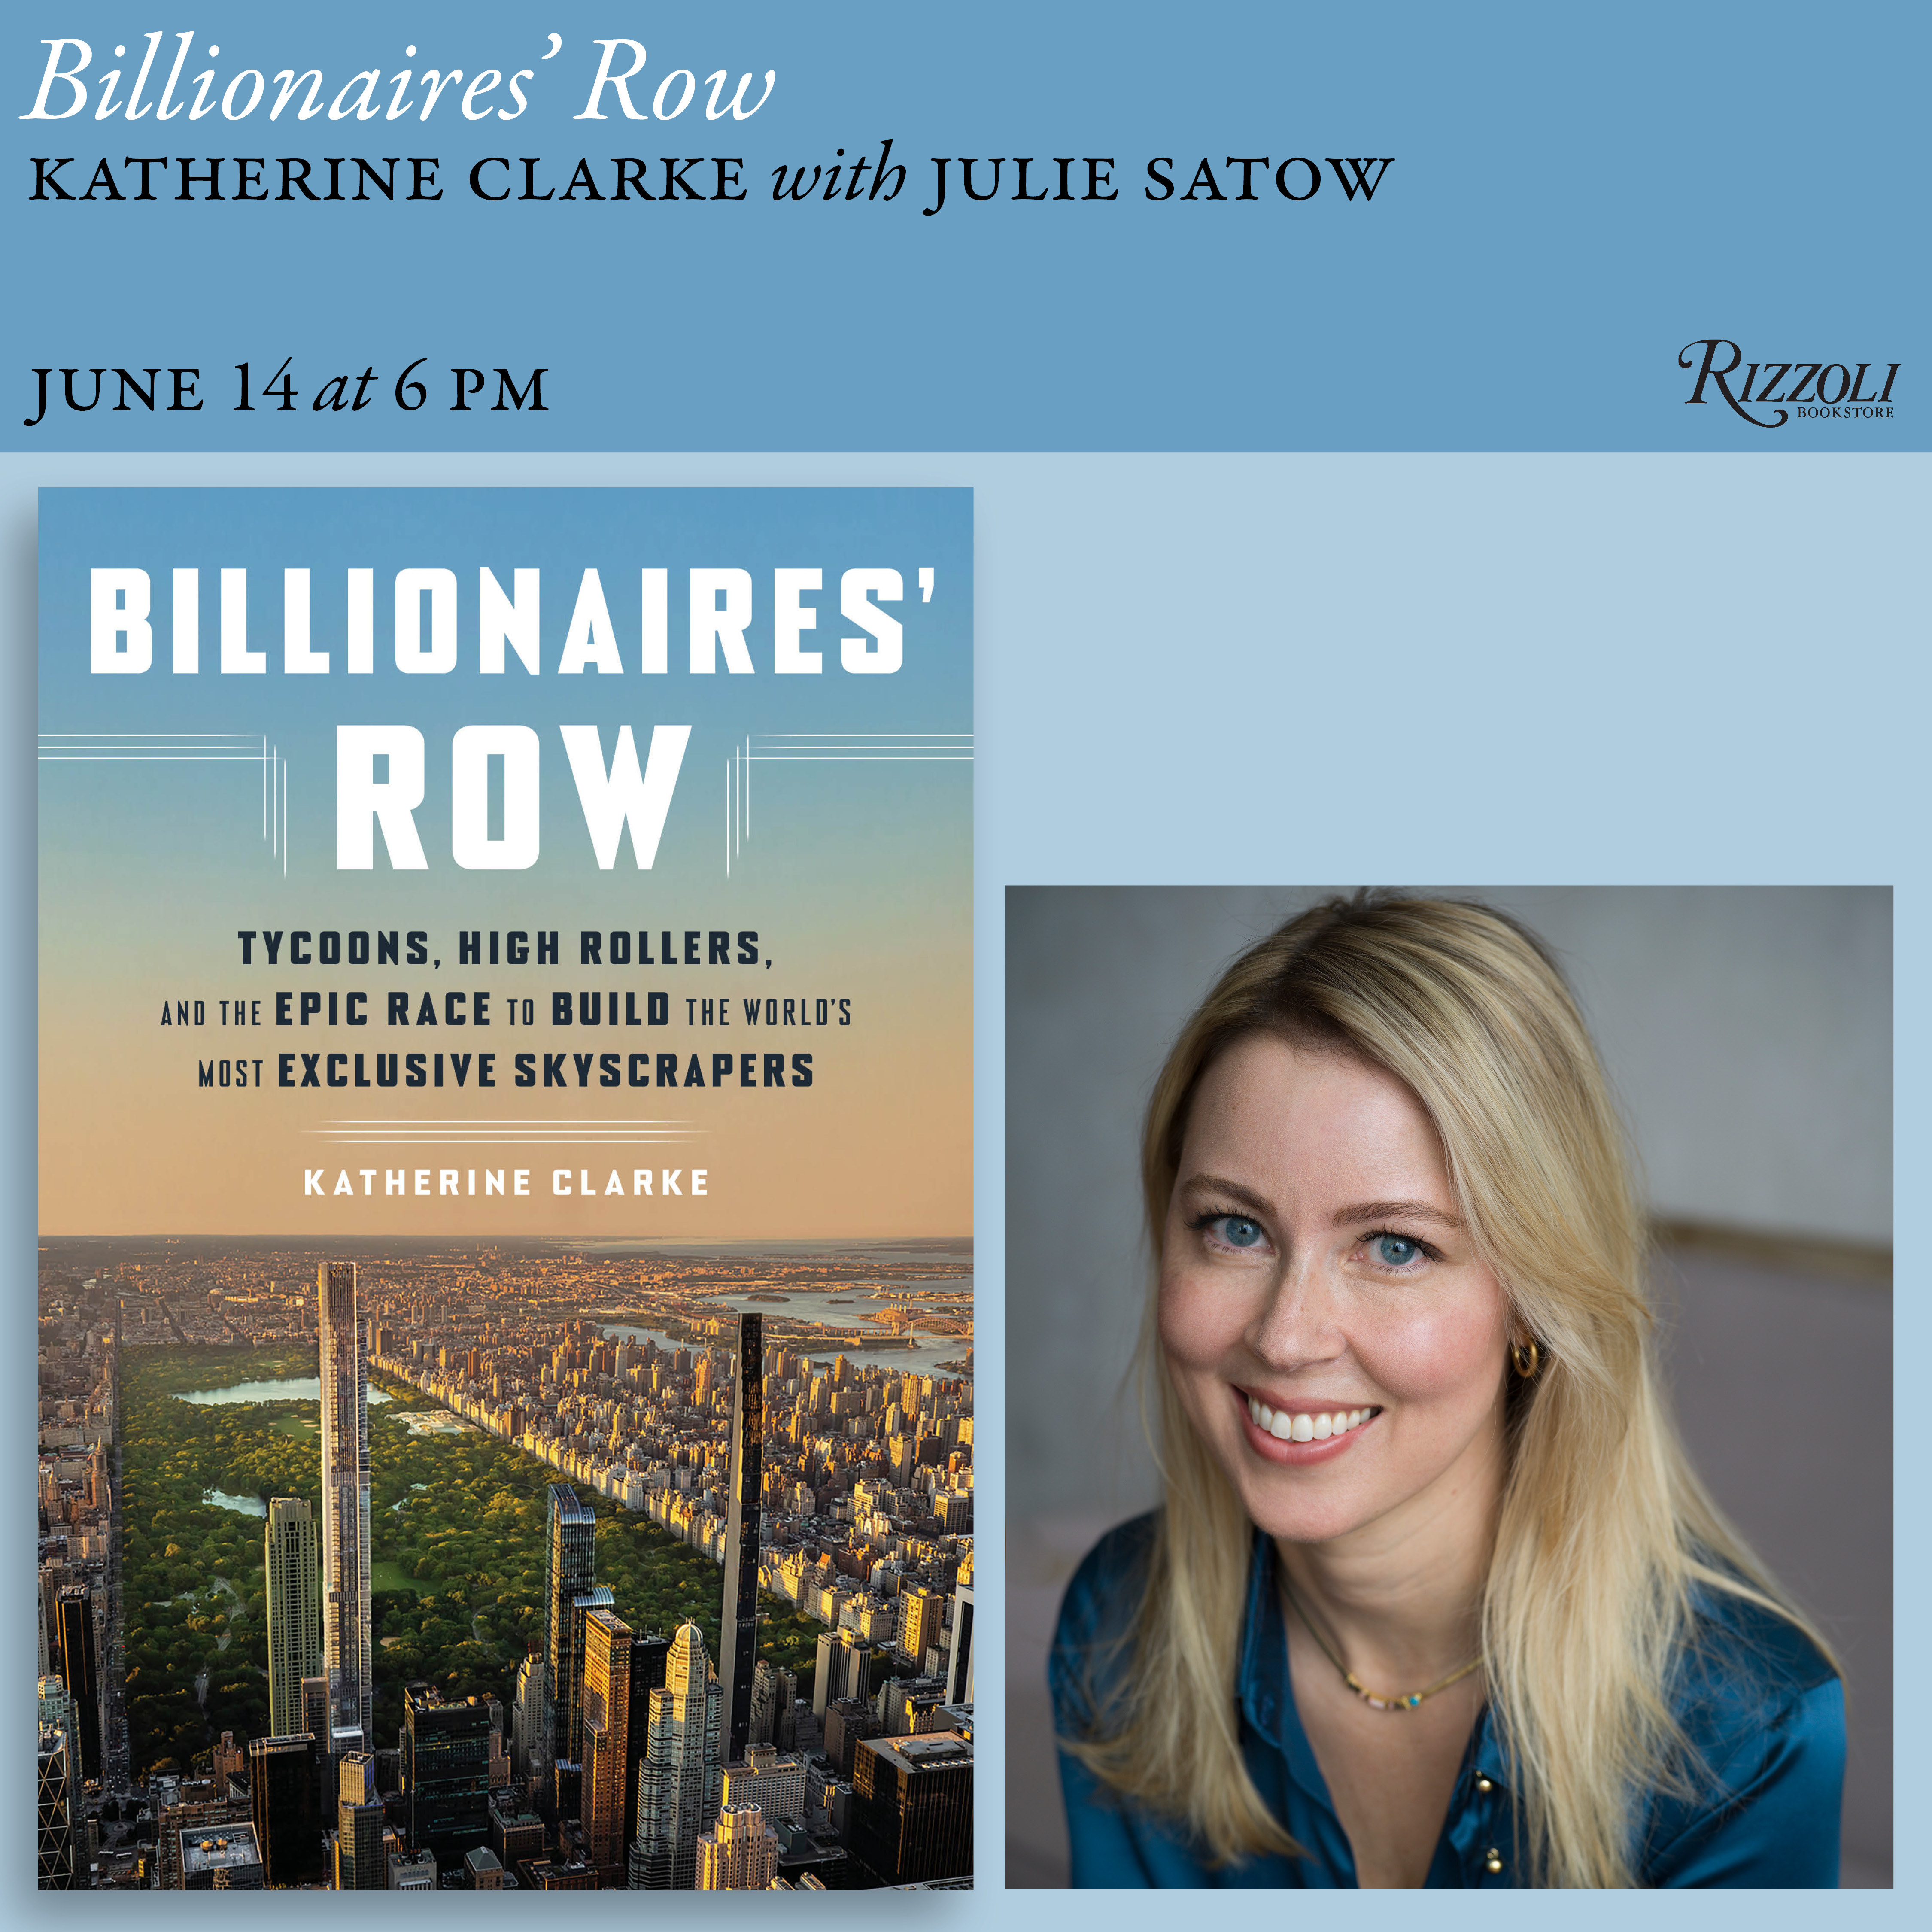 Billionaires' Row: Tycoons, High Rollers, and the Epic Race to